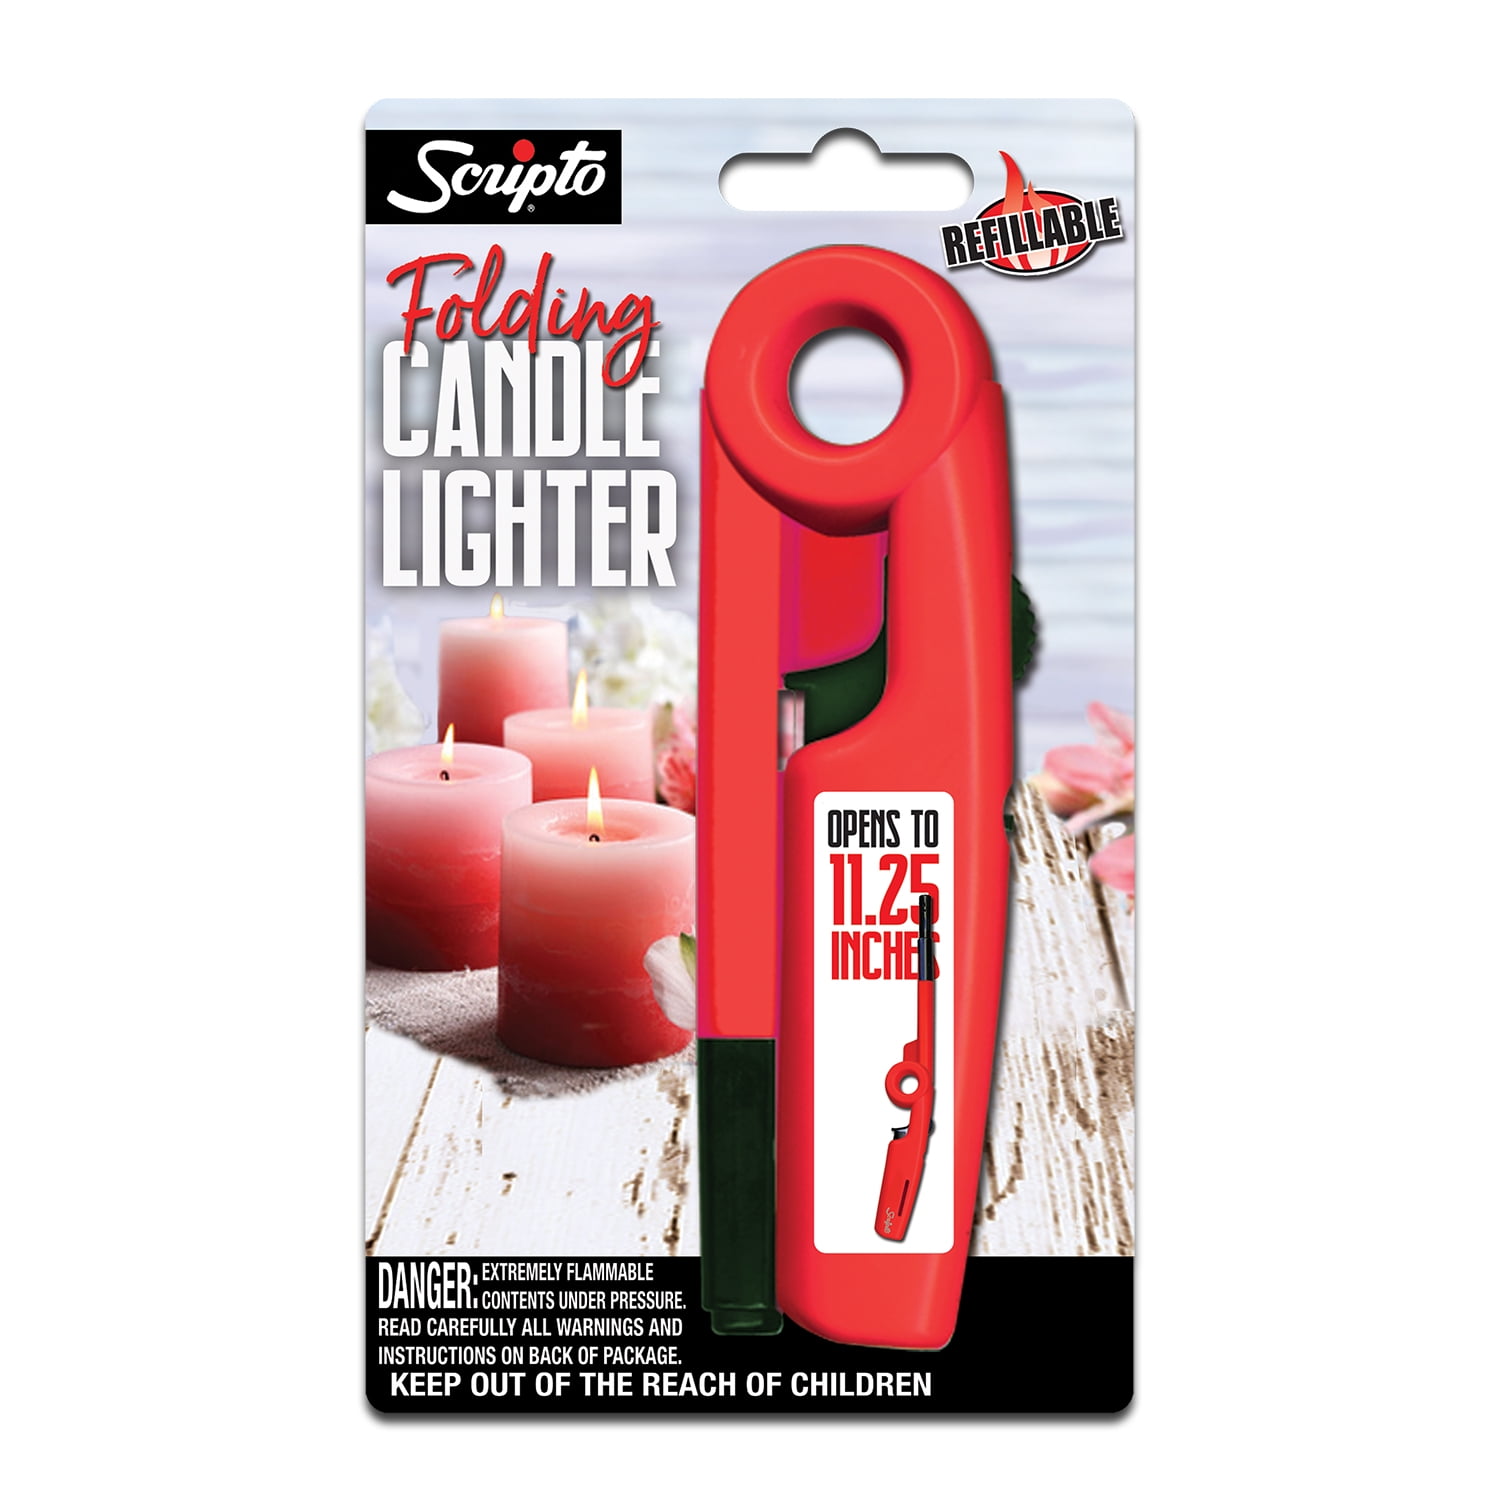 Scripto Refillable Folding Candle Lighter, 1 Count, Red